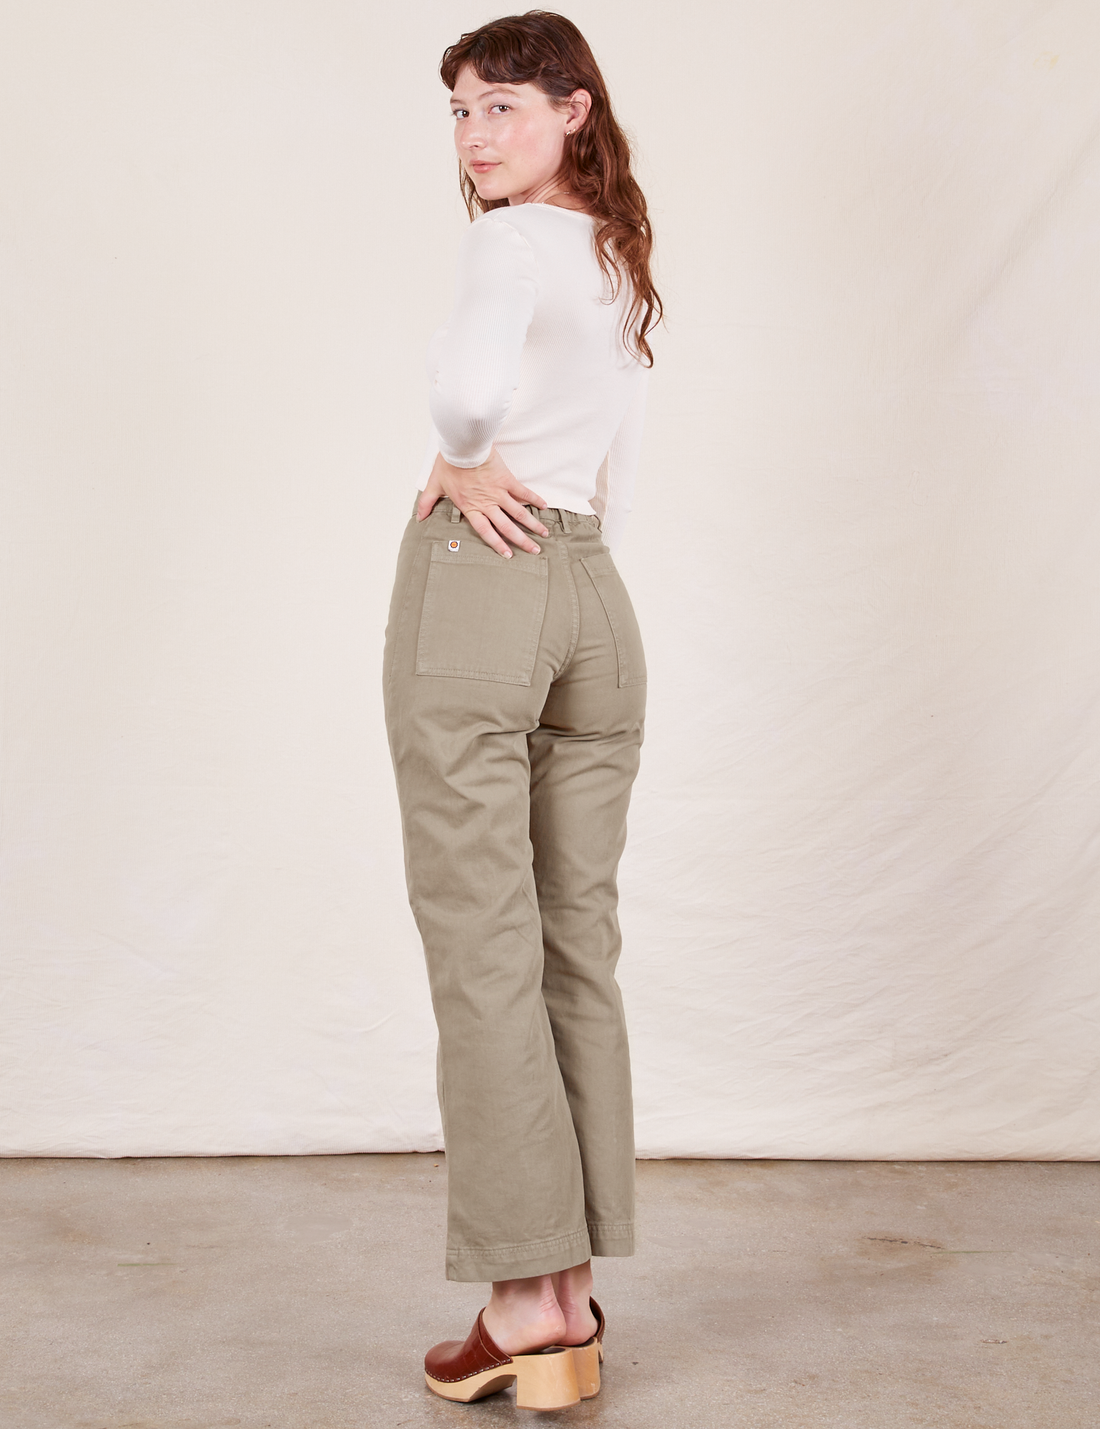 Western Pants in Khaki Grey back view on Alex wearing vintage off-white Long Sleeve V-Neck Tee